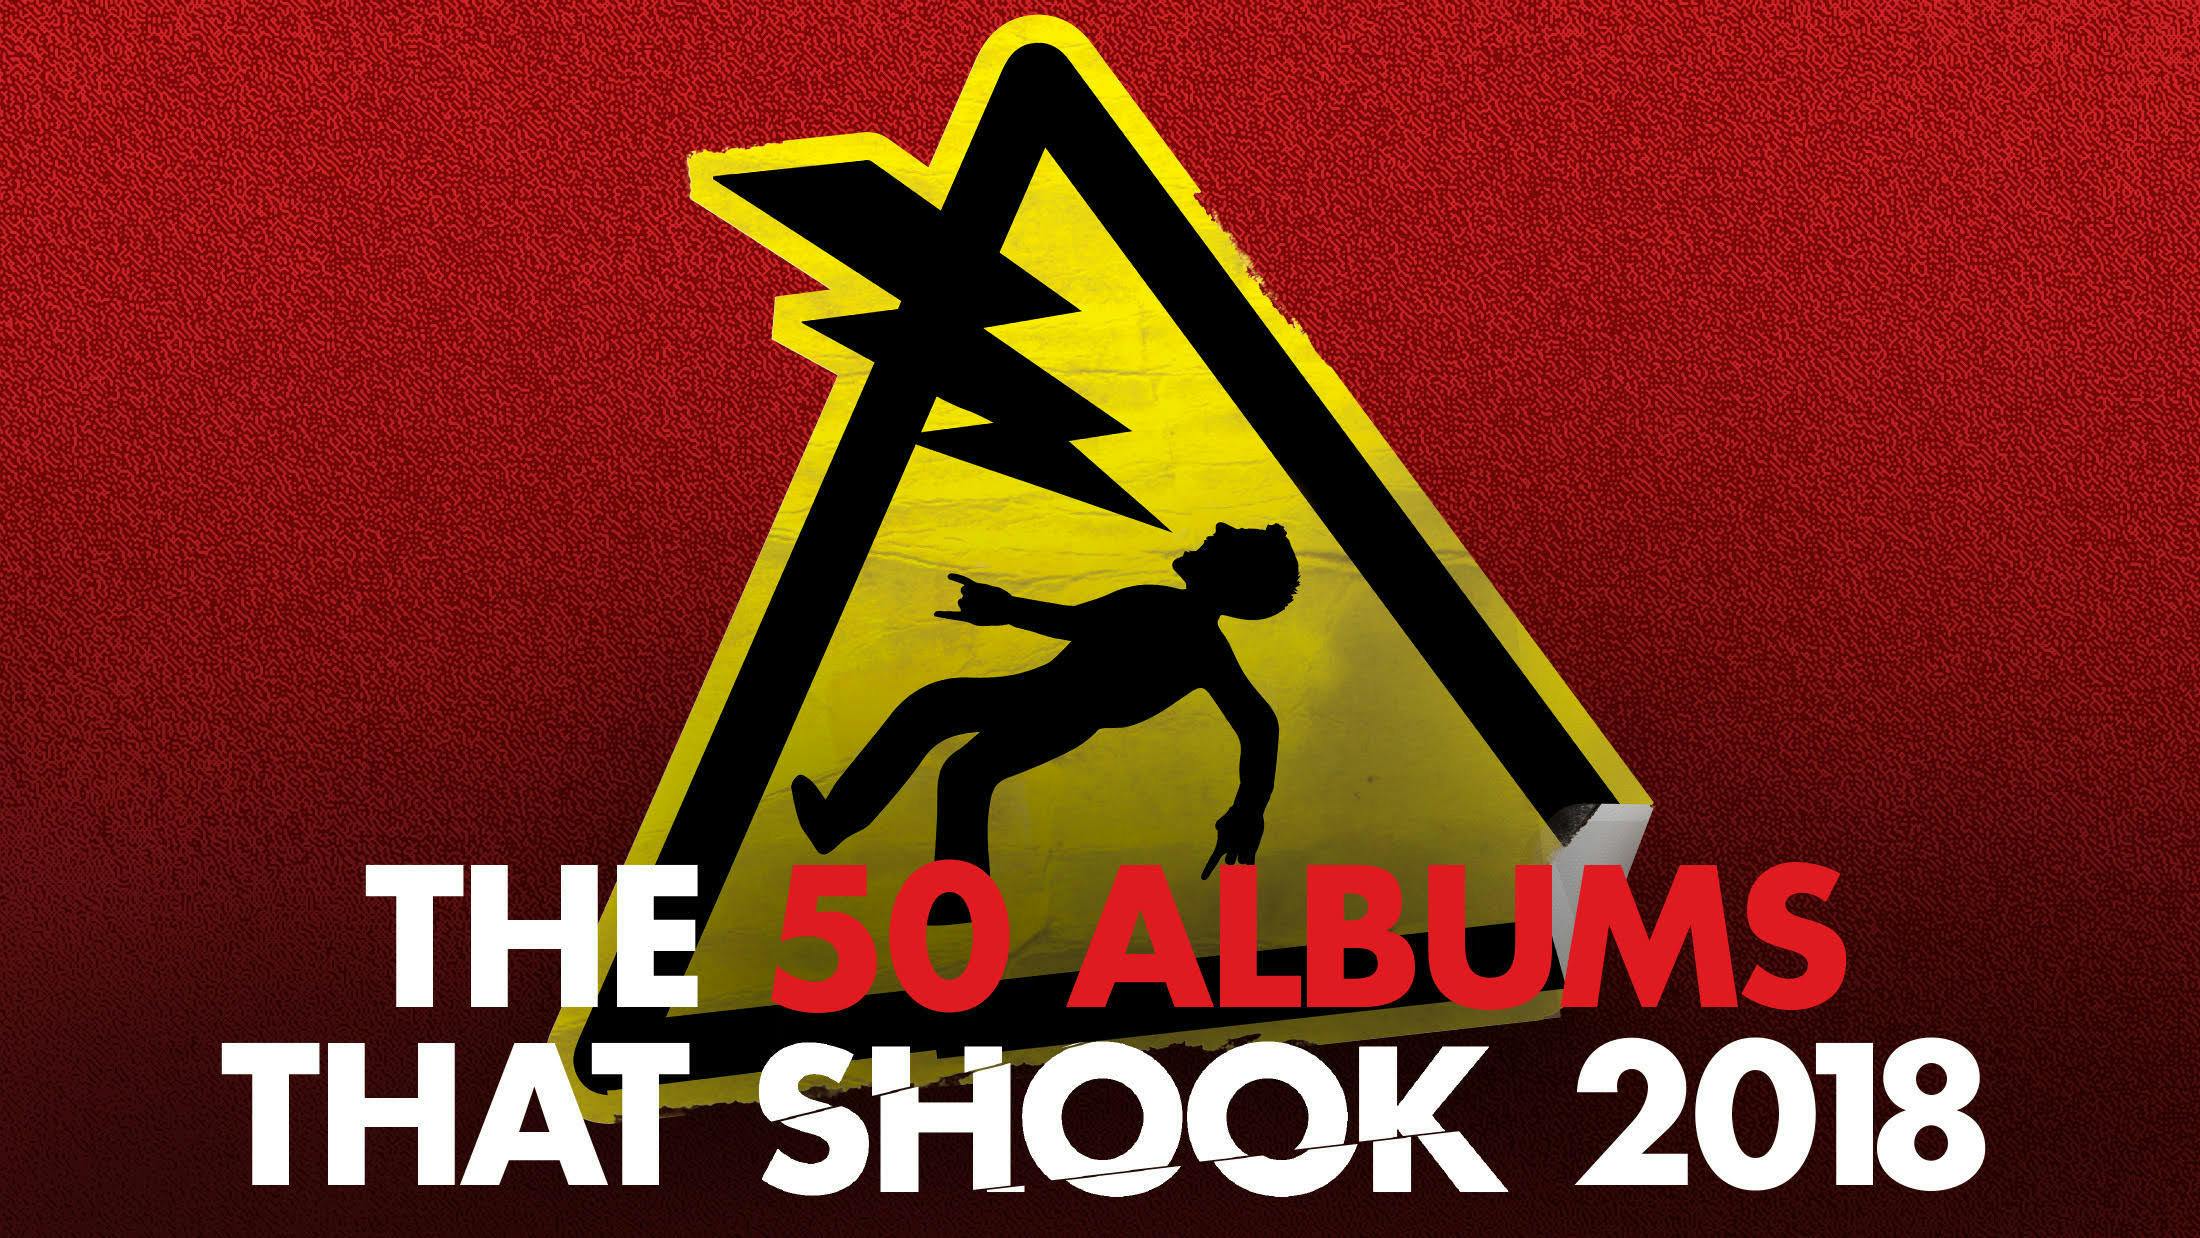 The 50 Albums That Shook 2018